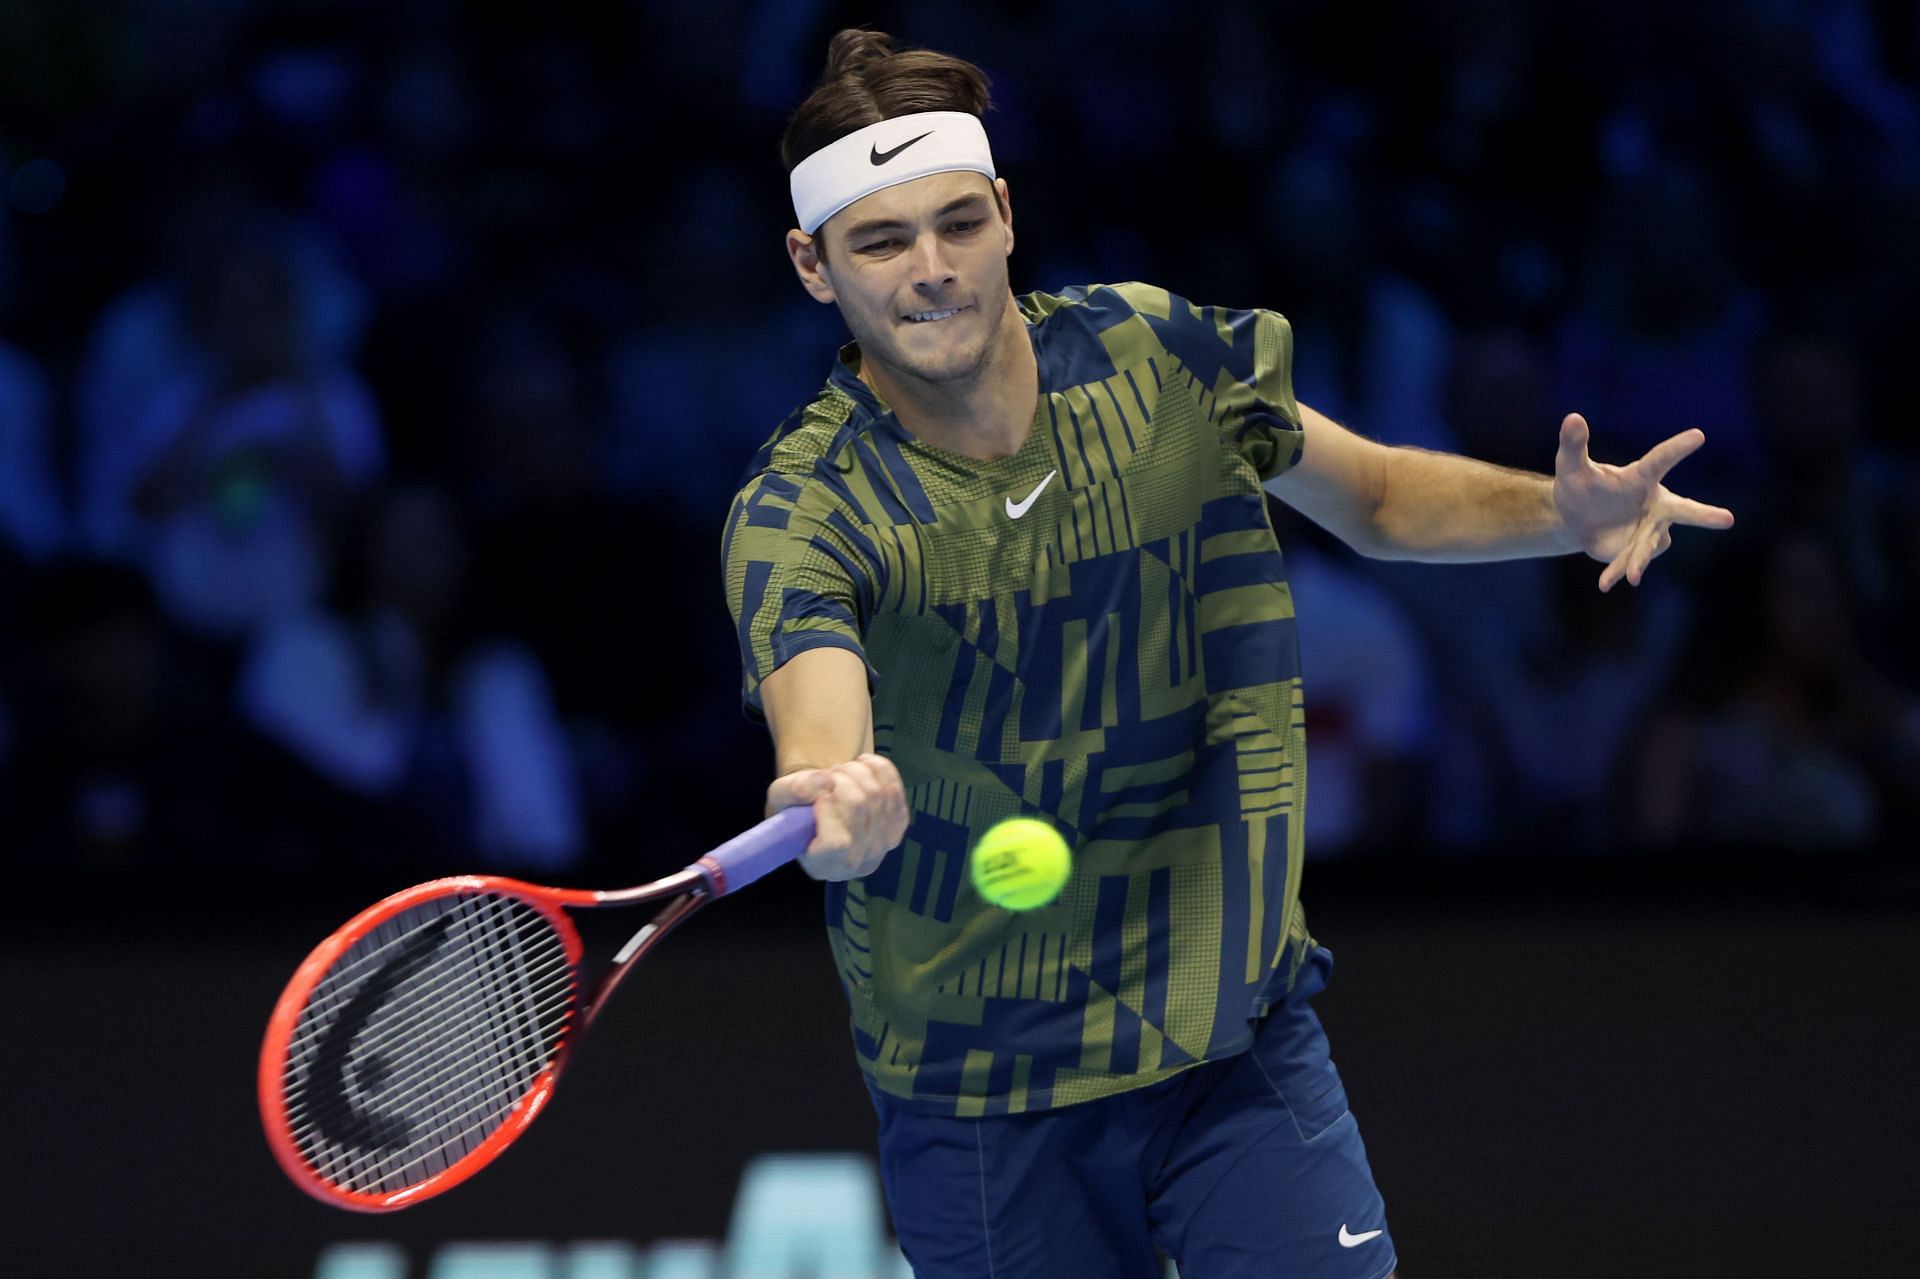 Taylor Fritz in action at the Nitto ATP Finals 2022